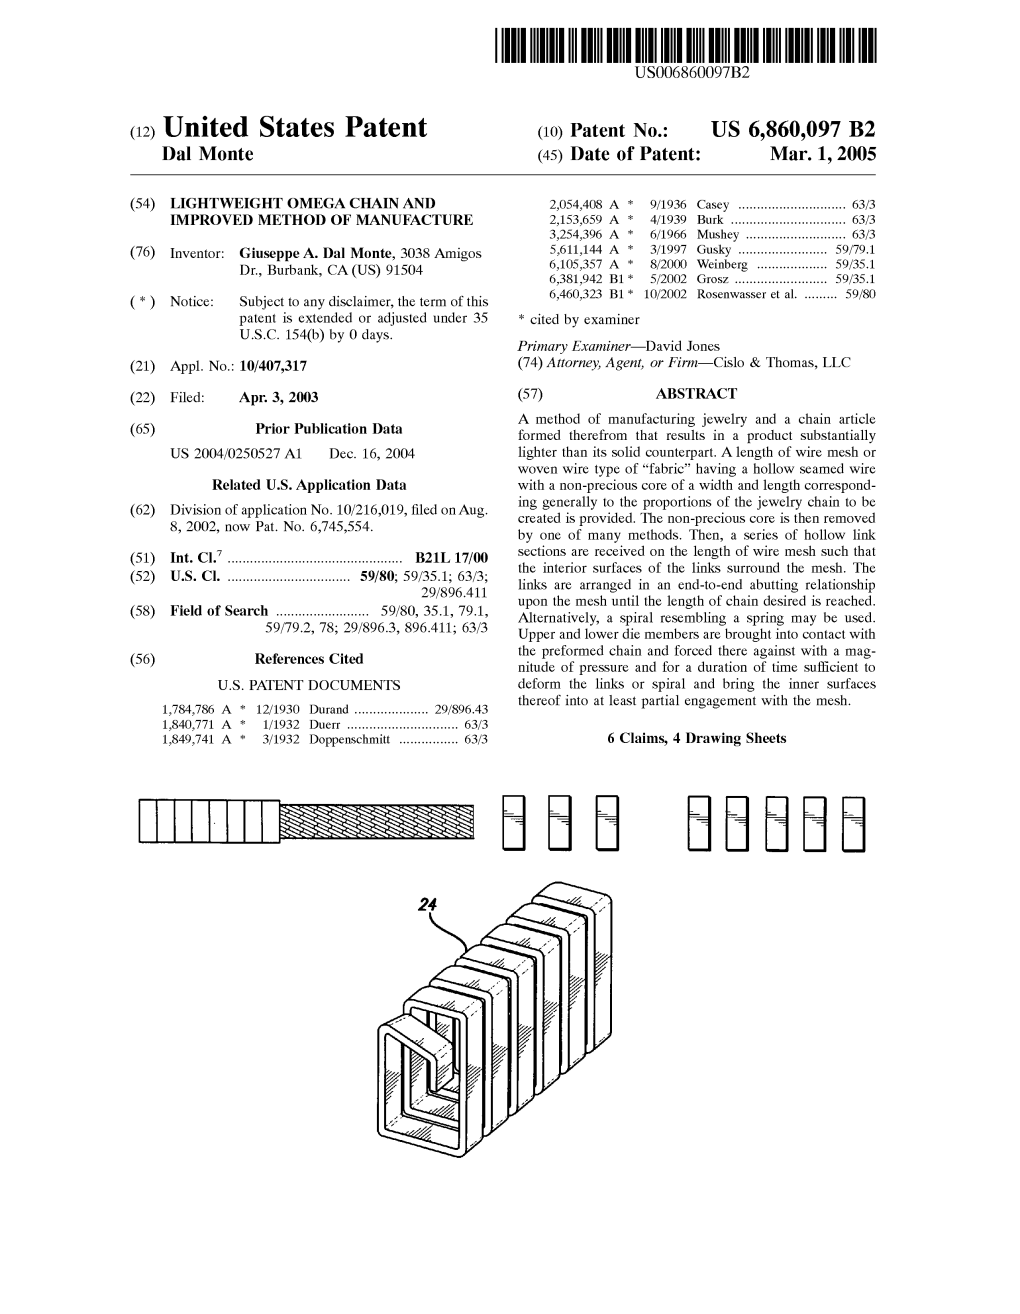 United States Patent (10) Patent N0.: US 6,860,097 B2 Dal Monte (45) Date of Patent: Mar